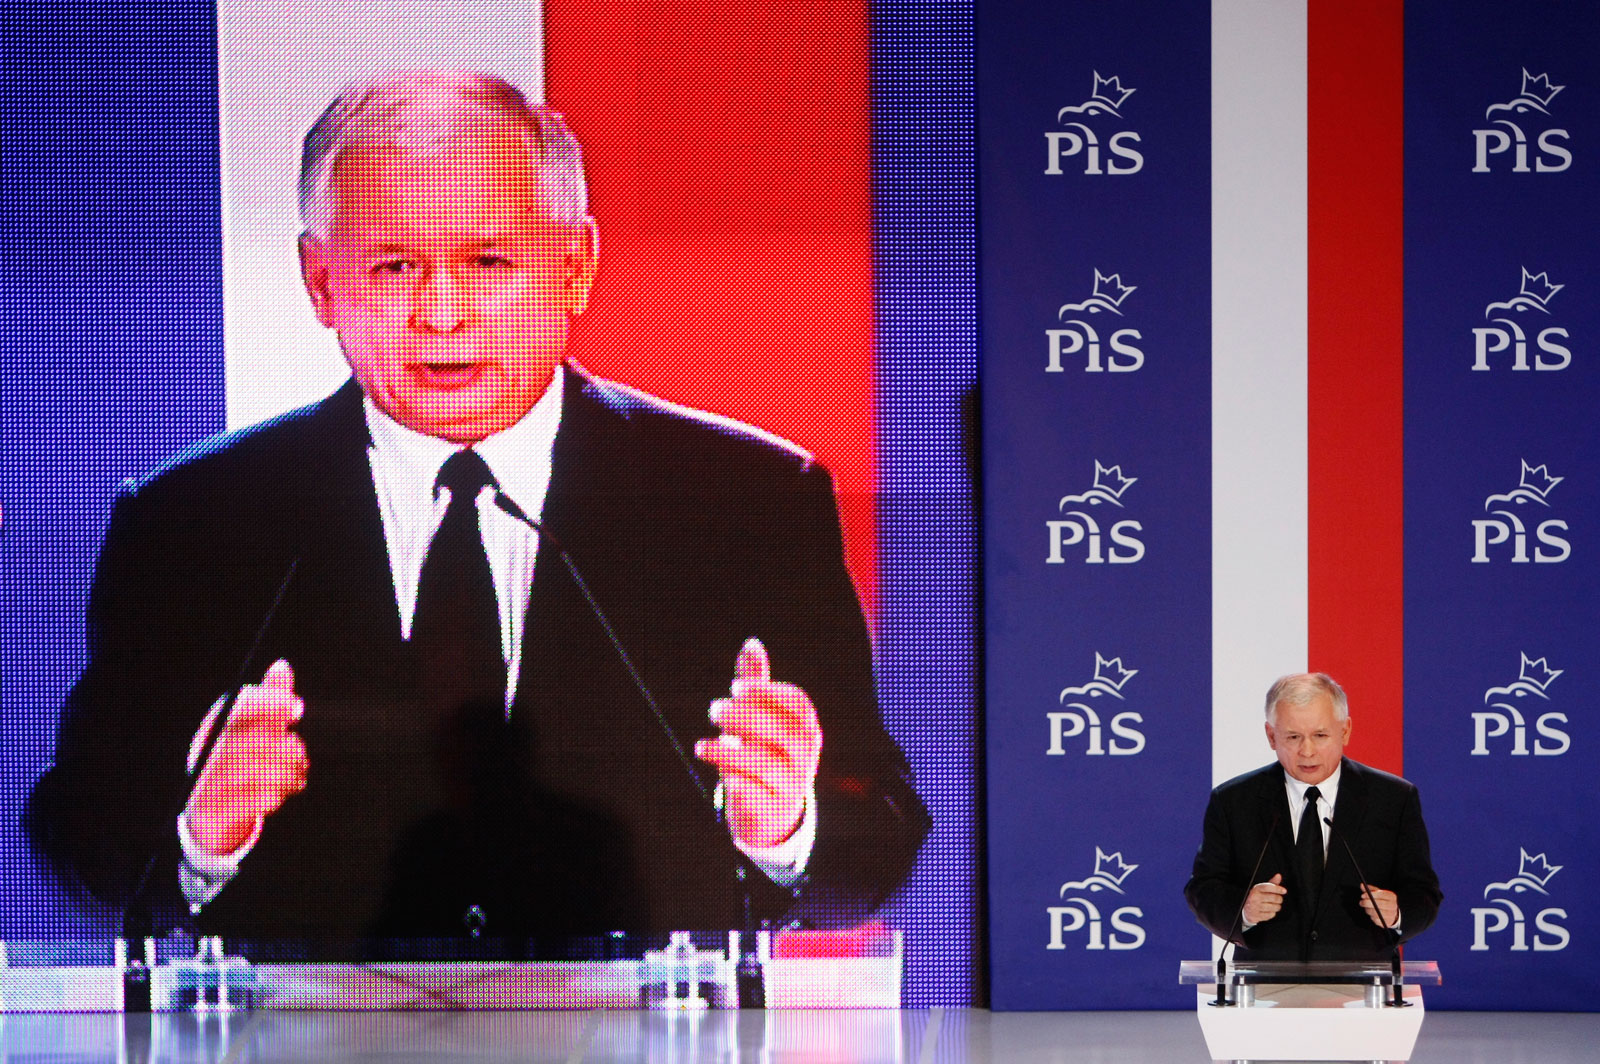 Jarosław Kaczyński, leader of Poland's main opposition Law and Justice Party (PiS) speaks during the final pre-election convention in Warsaw, October 7, 2011